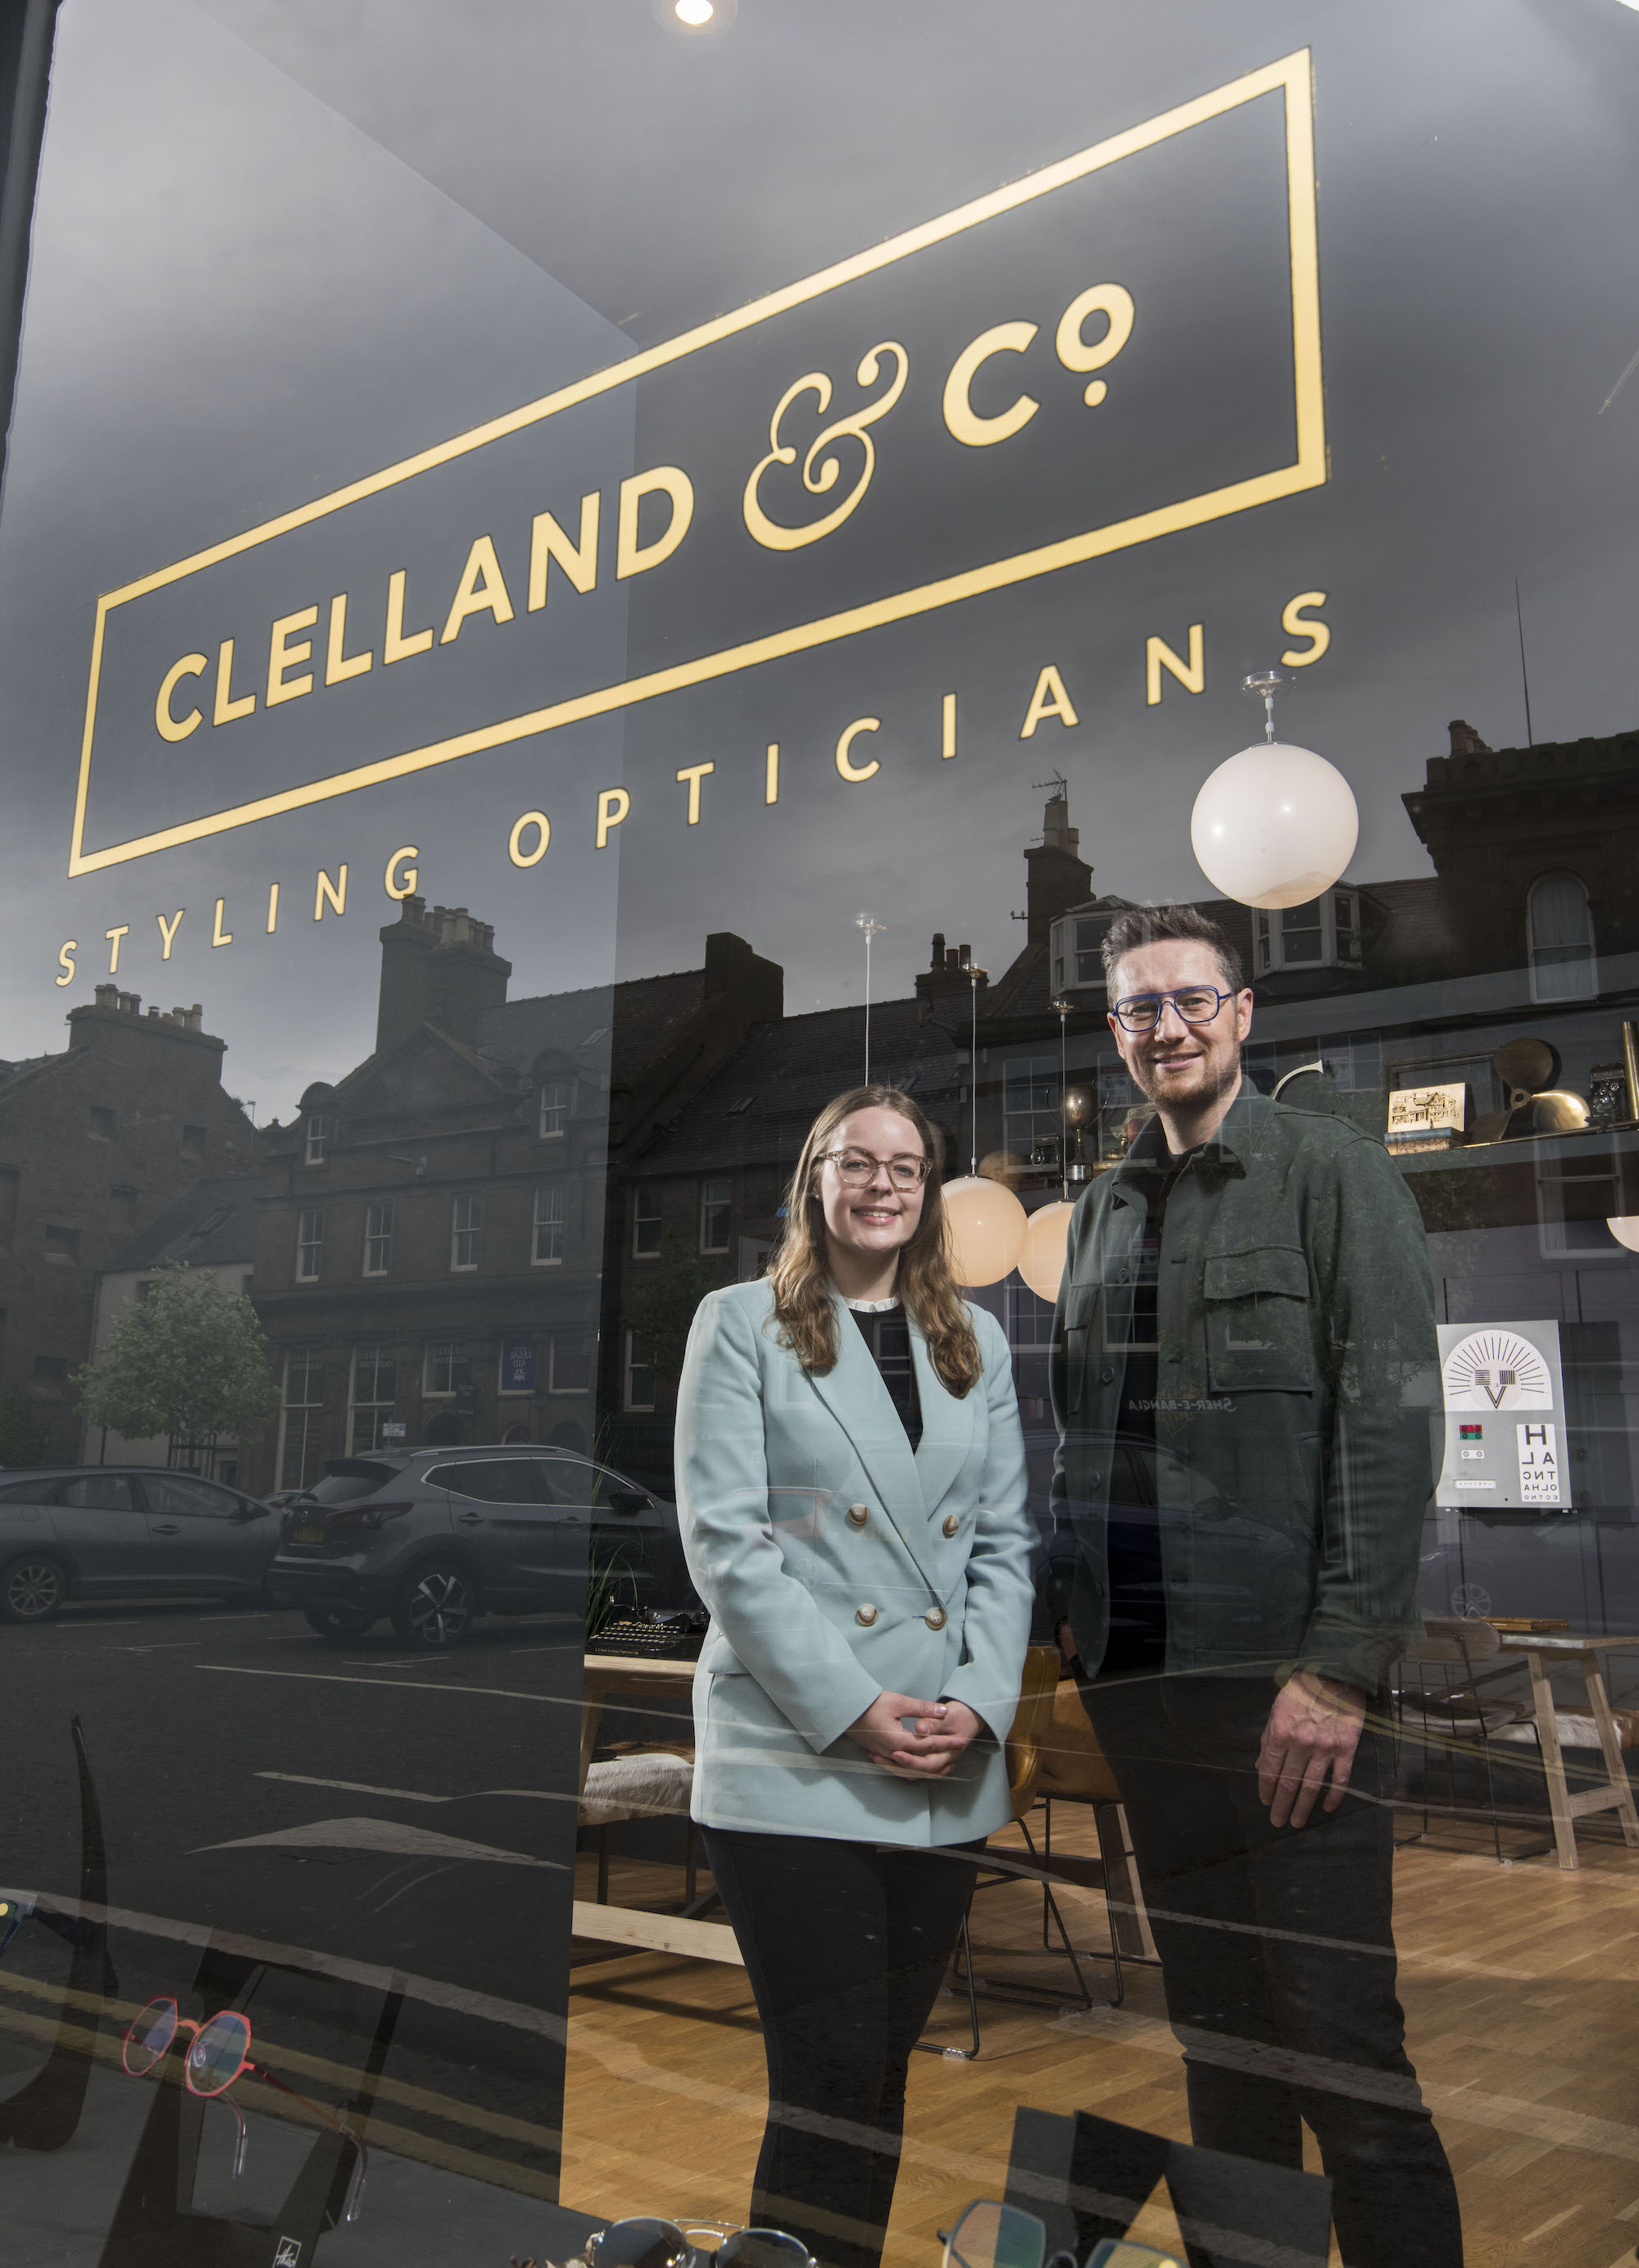 Specialist opticians Clelland & Co. eyes-up St Andrews expansion